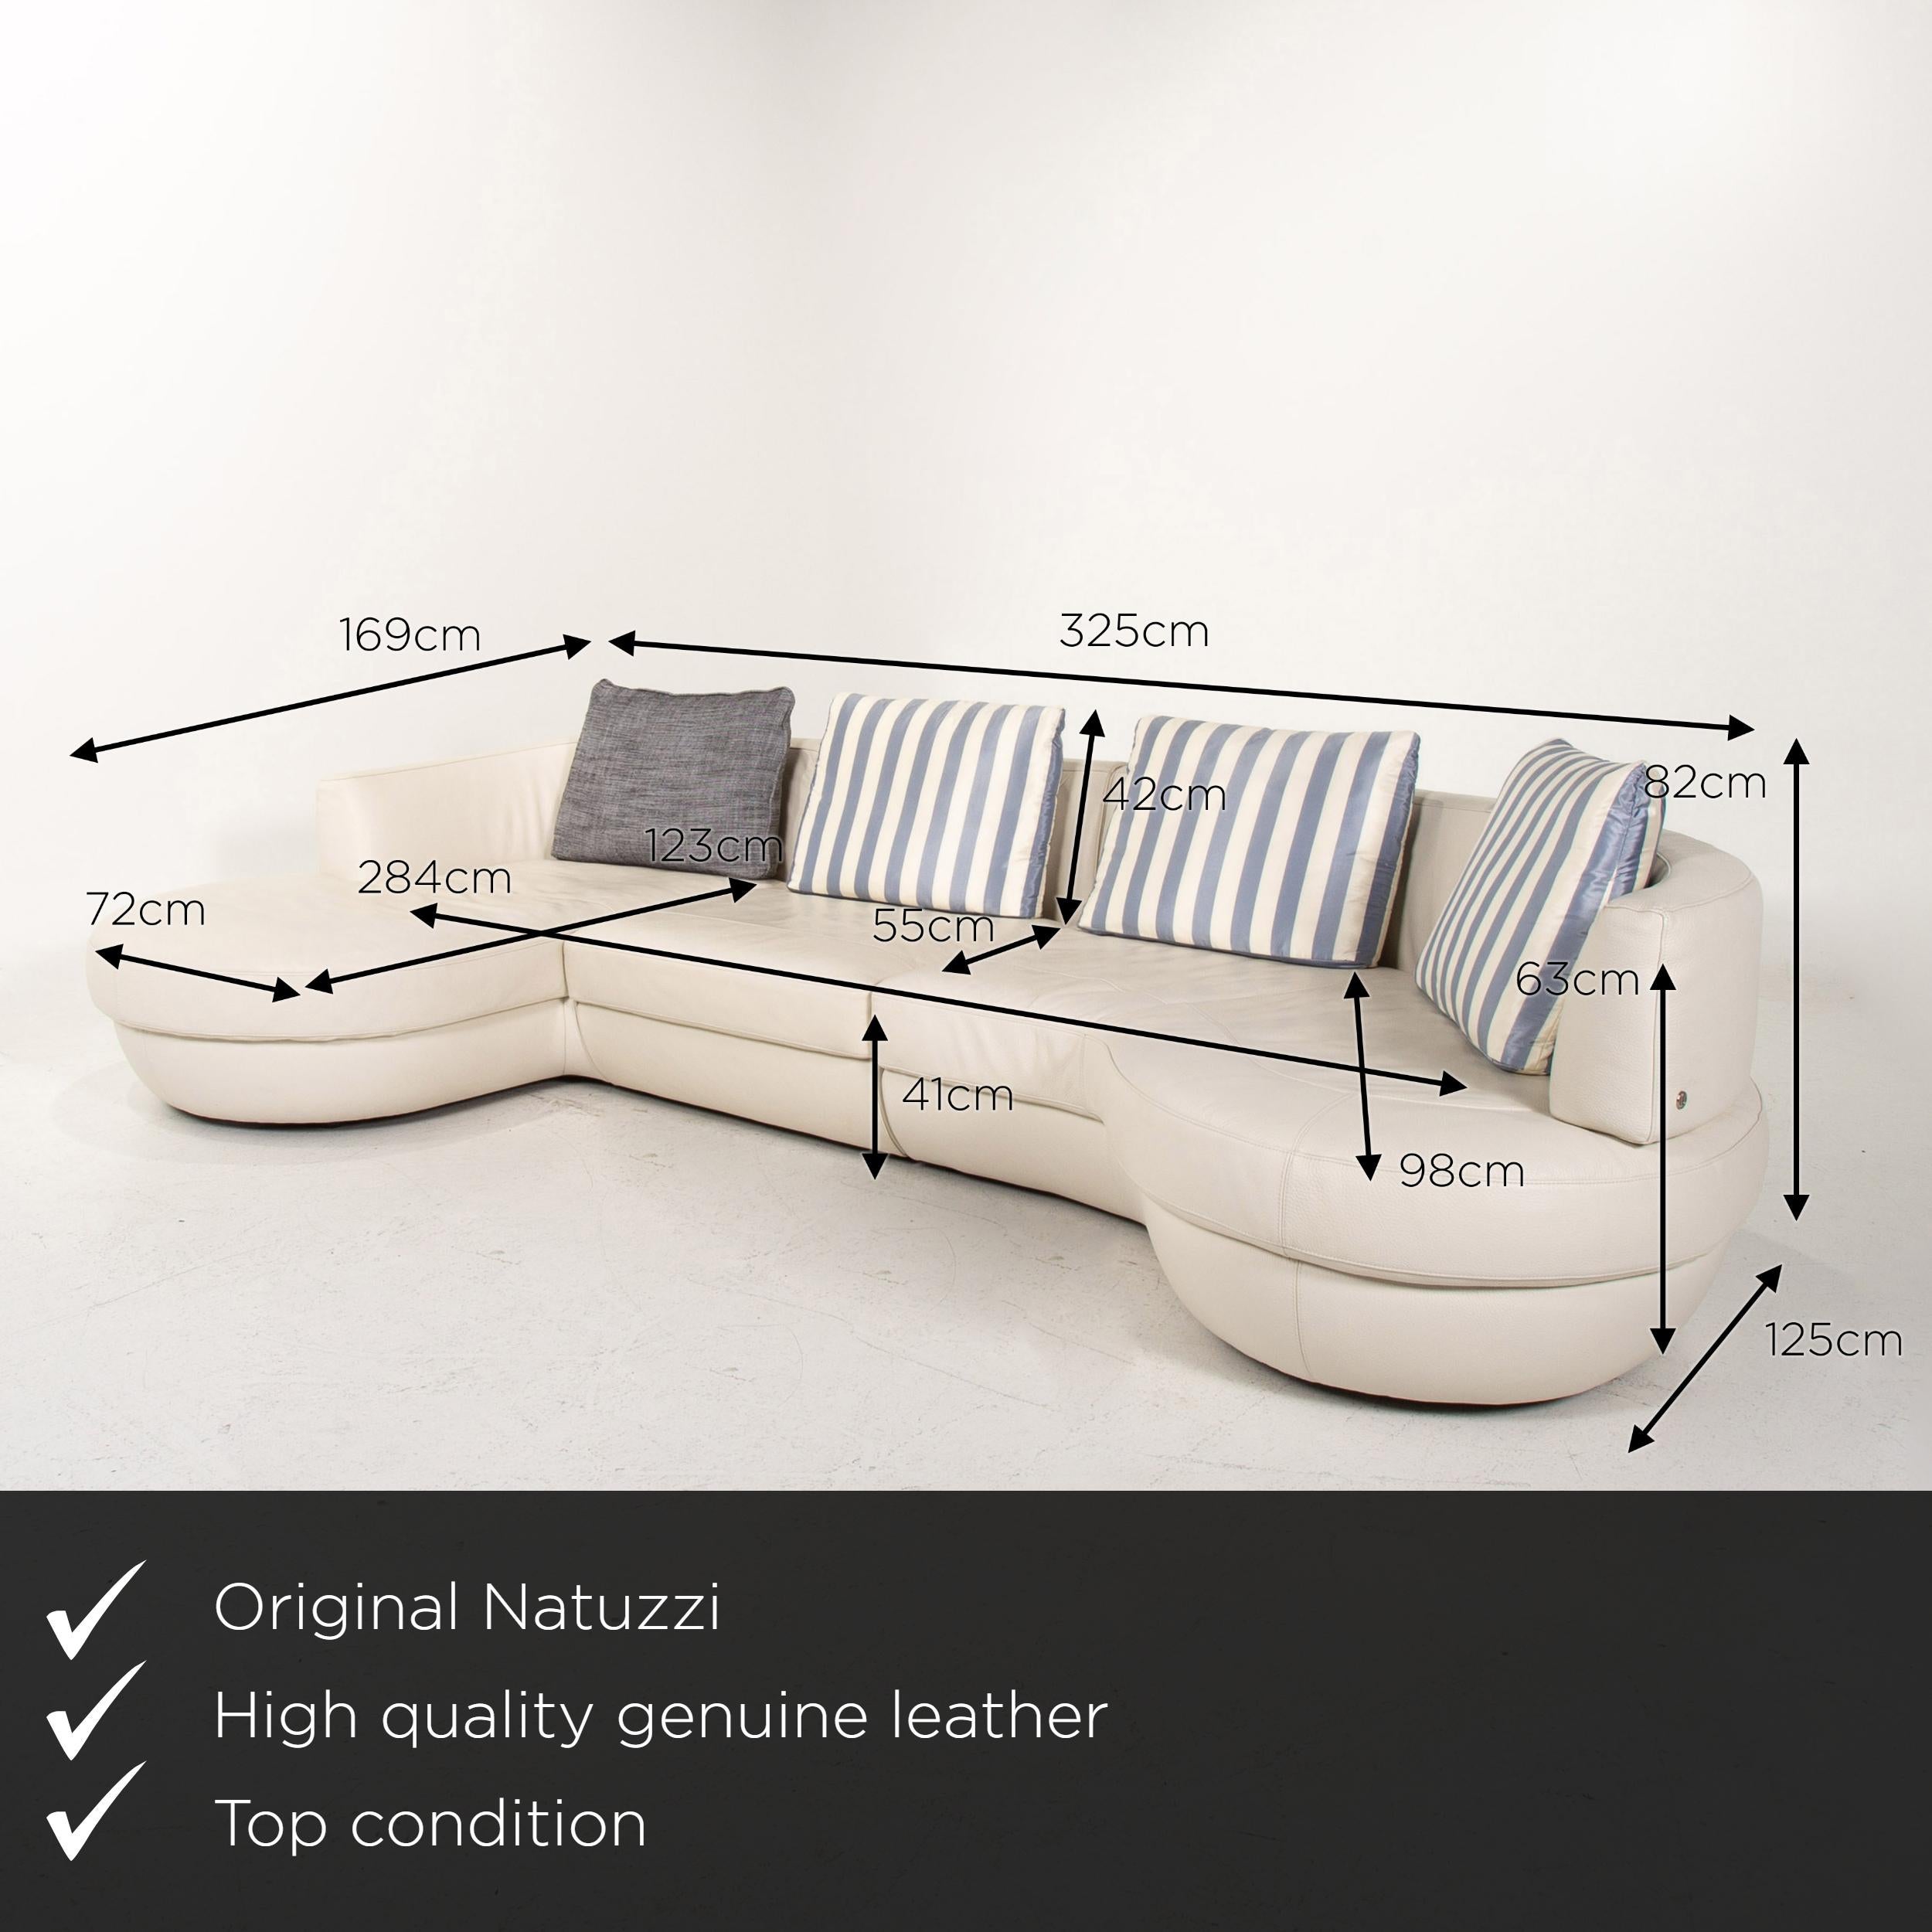 We present to you a Natuzzi leather corner sofa white sofa couch.

 

 Product measurements in centimeters:
 

Depth 169
Width 169
Height 82
Seat height 41
Rest height 63
Seat depth 123
Seat width 284
Back height 42.